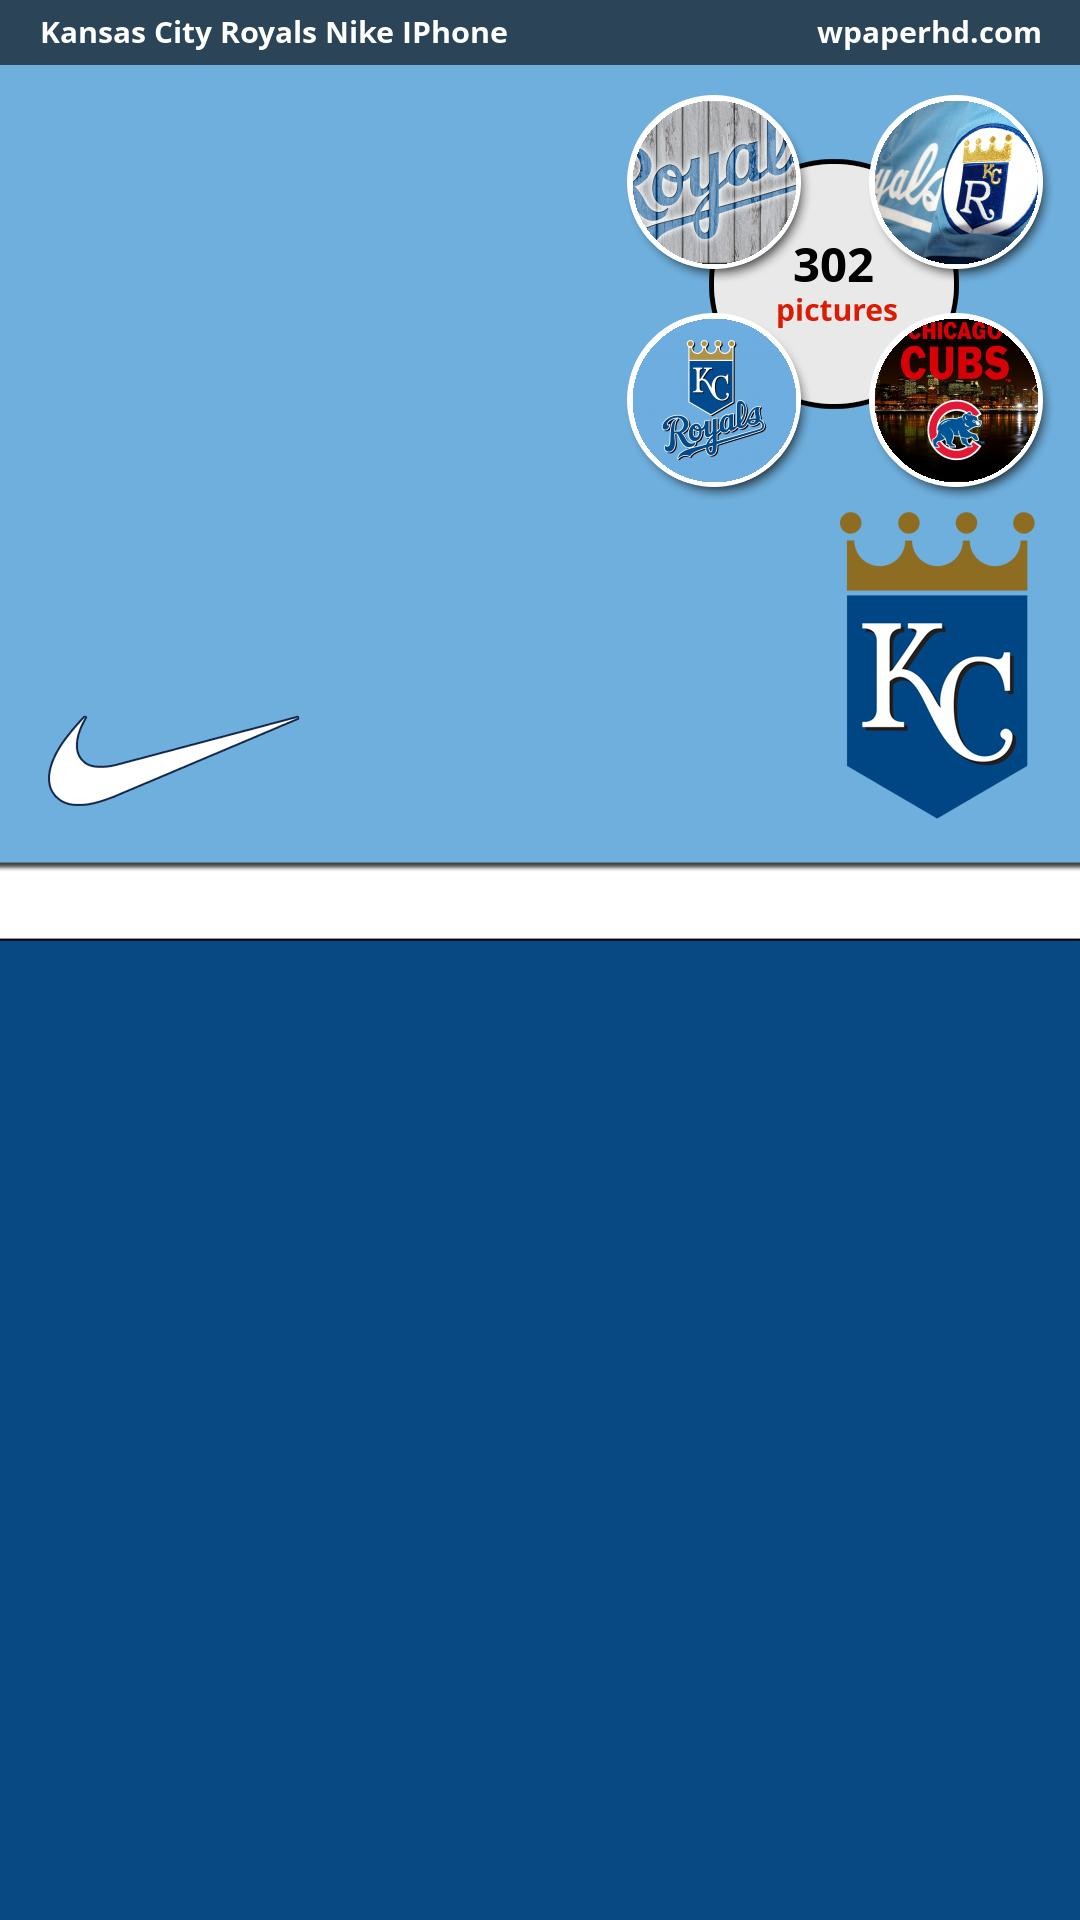 1080x1920 You are on page with Kansas City Royals Nike IPhone wallpaper, where you  can download this picture in Original size and ...